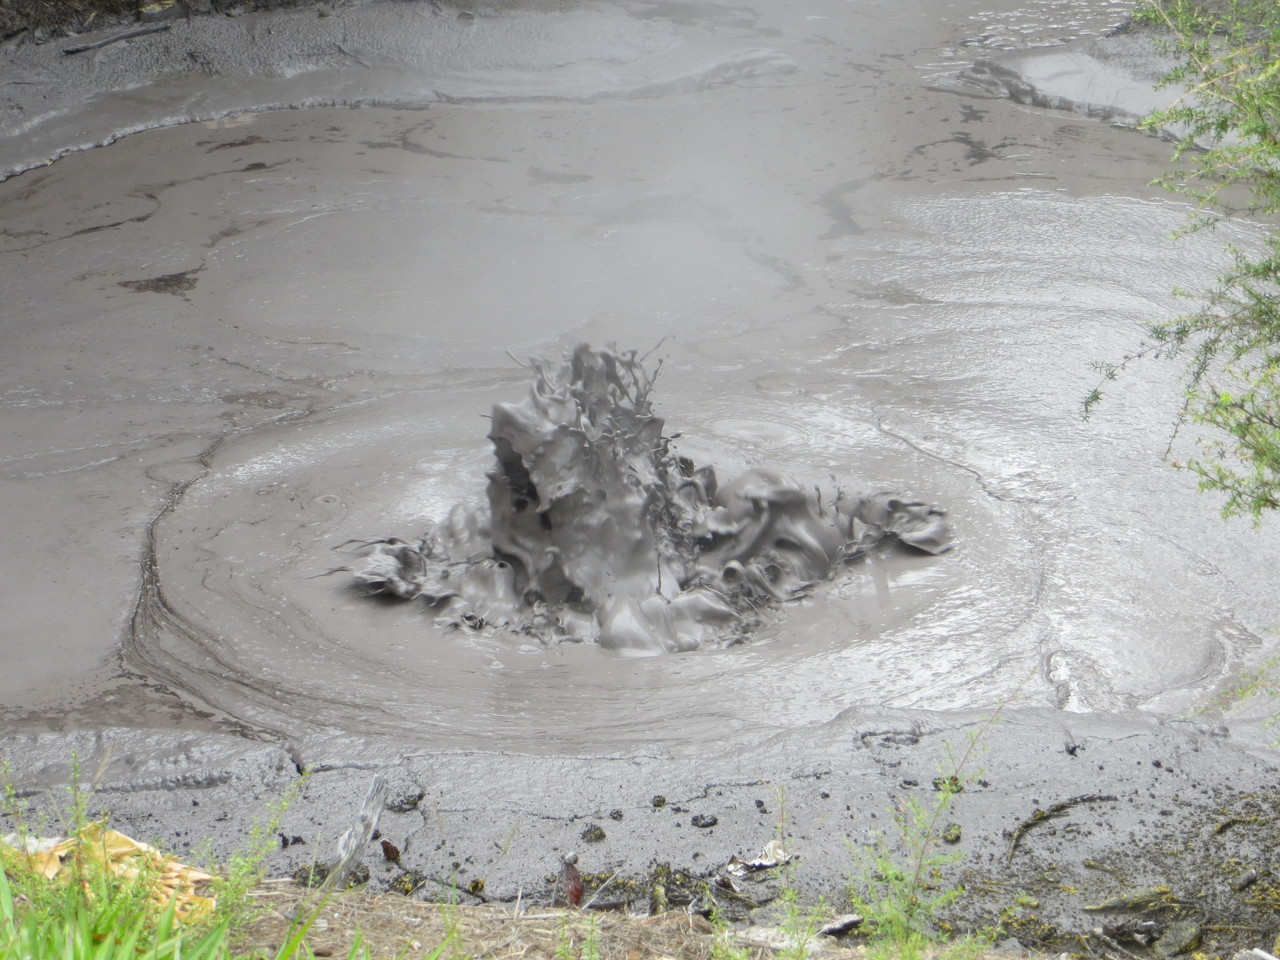 Hot and bubbling "Mud Pools" überall